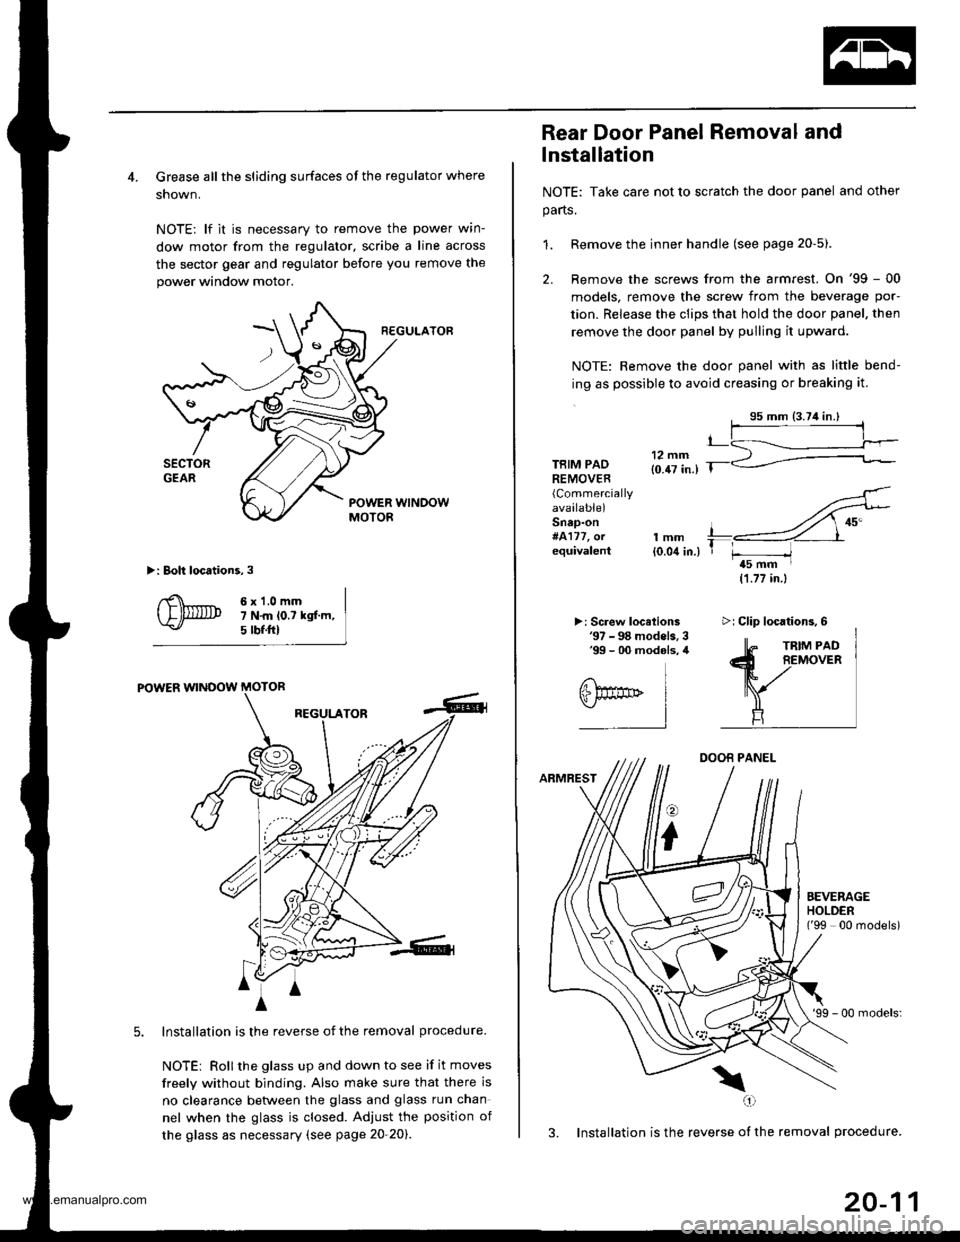 HONDA CR-V 1997 RD1-RD3 / 1.G Workshop Manual 
4. Grease all the sliding surfaces of the regulator where
shown.
NOTE: lf it is necessary to remove the power wrn-
dow motor from the regulator, scribe a line across
the sector gear and regulator bef